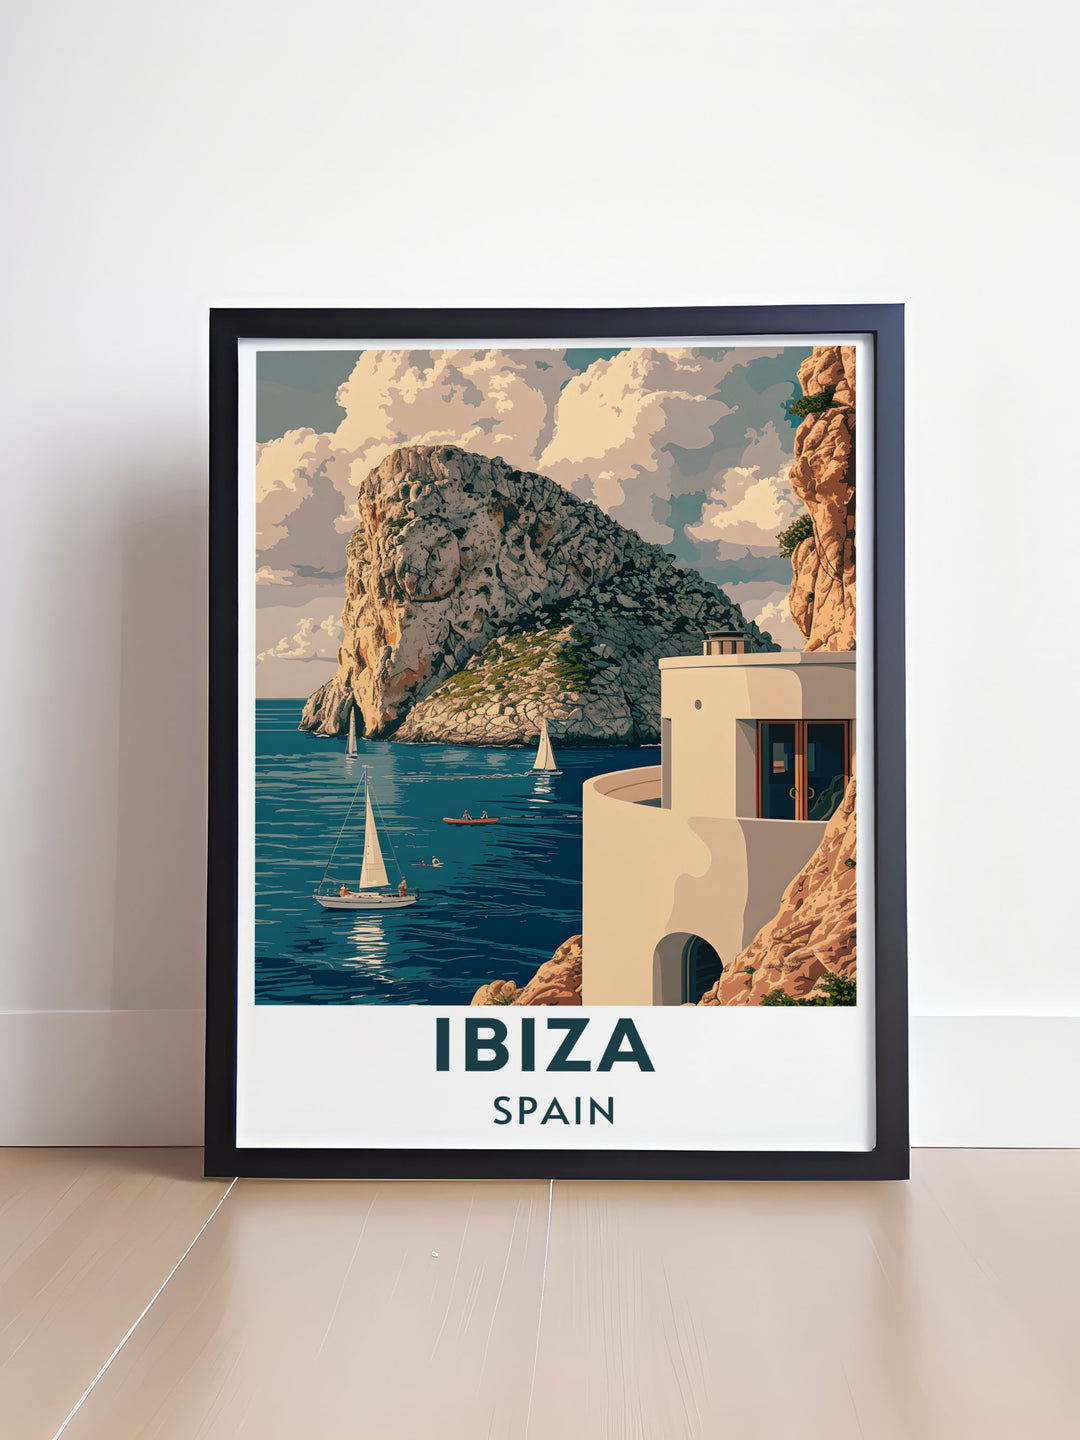 Capturing the dynamic nightlife and stunning beaches of Ibiza, this travel poster brings the vibrant spirit of the island into your home decor. Perfect for travelers and those who love lively atmospheres.